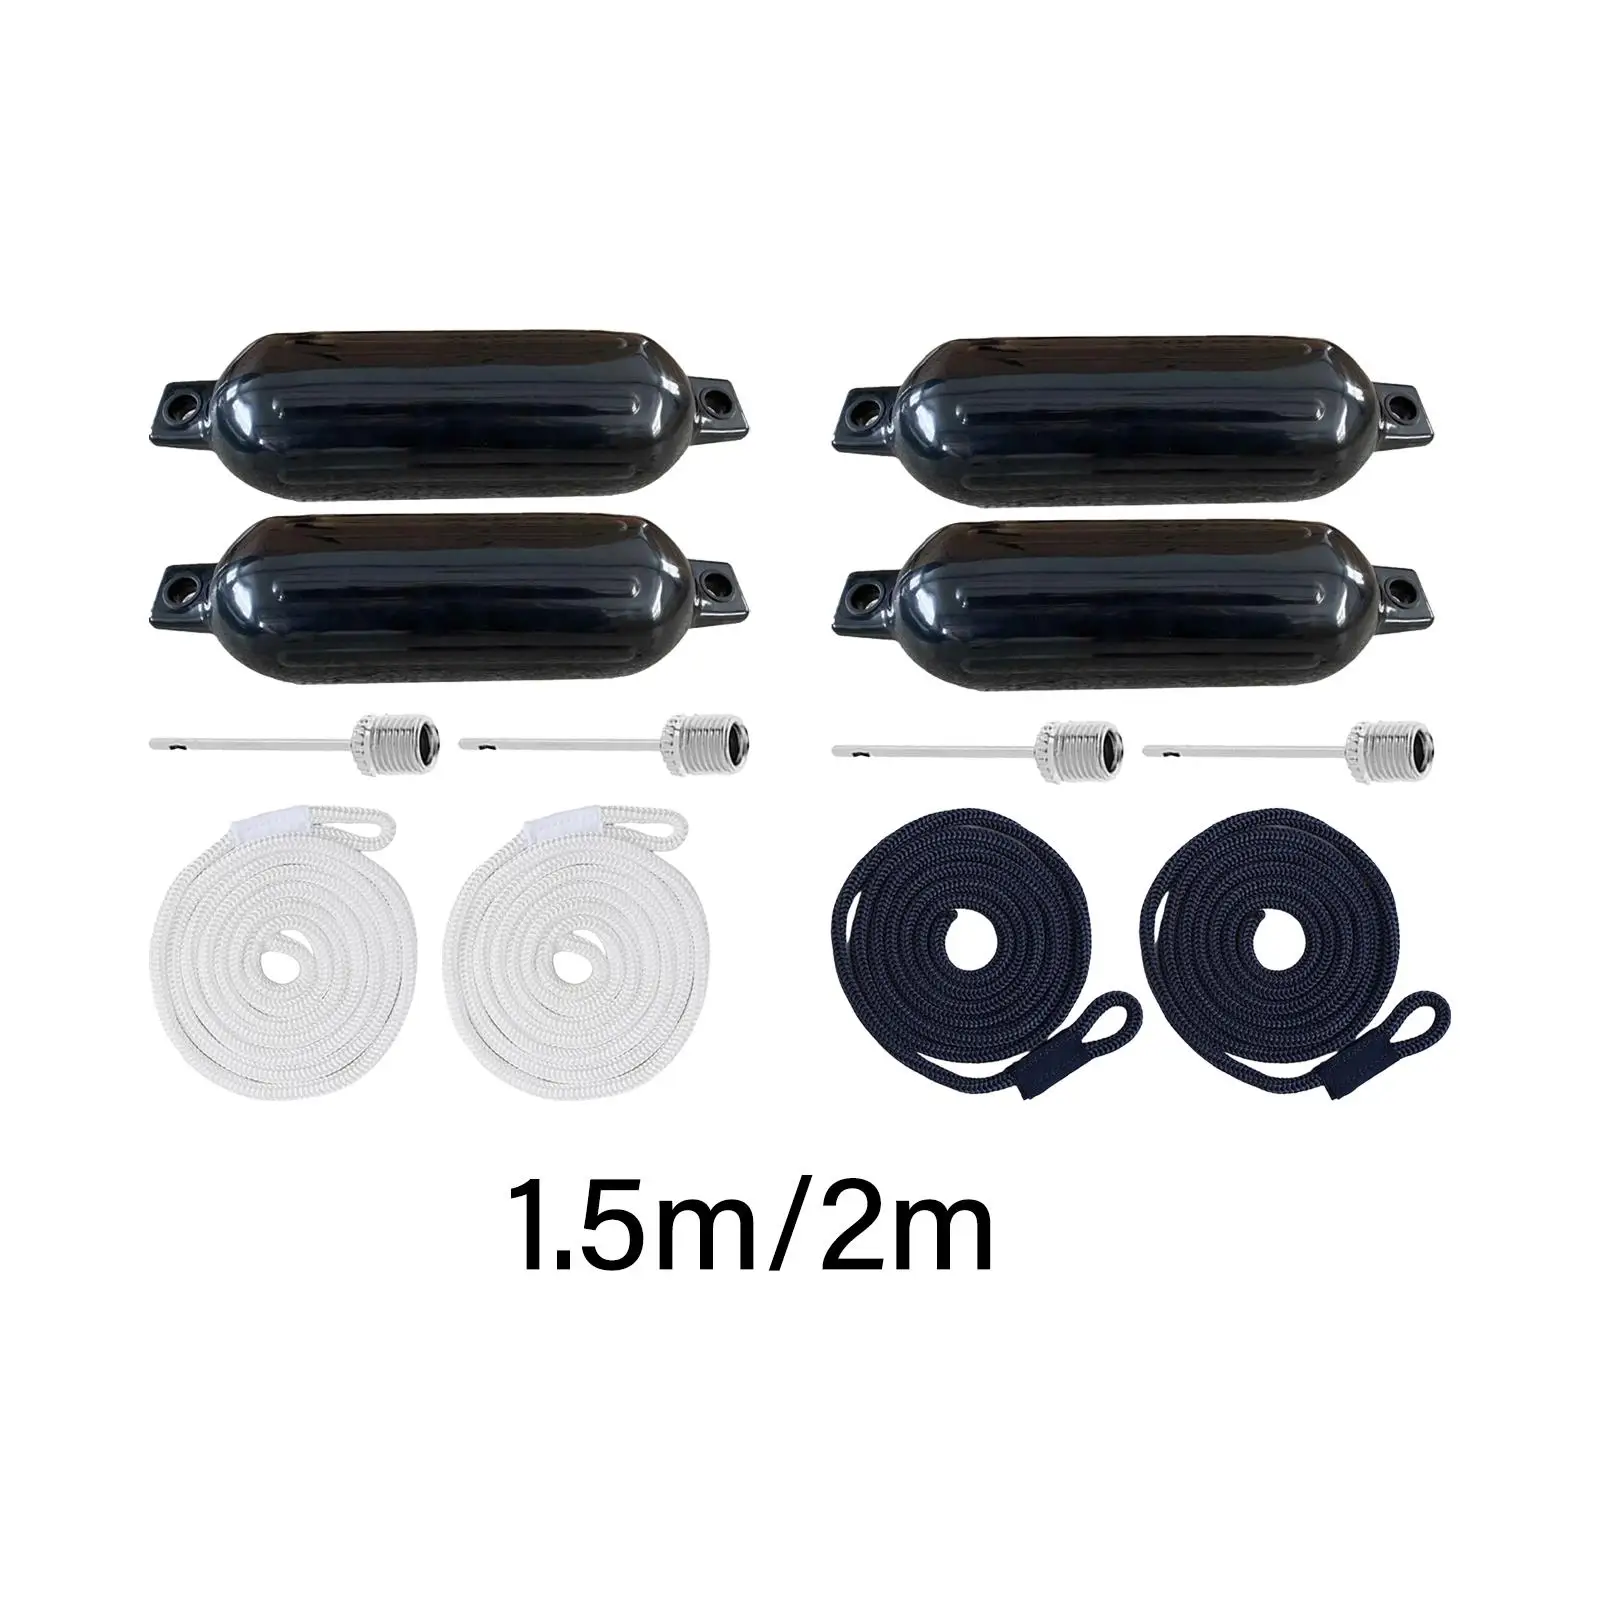 

Marine Boat Fenders 4x16inch with 2 Ropes Anti Collision Protection Boat Bumpers for Speedboat Yacht Pontoon Fishing Boats